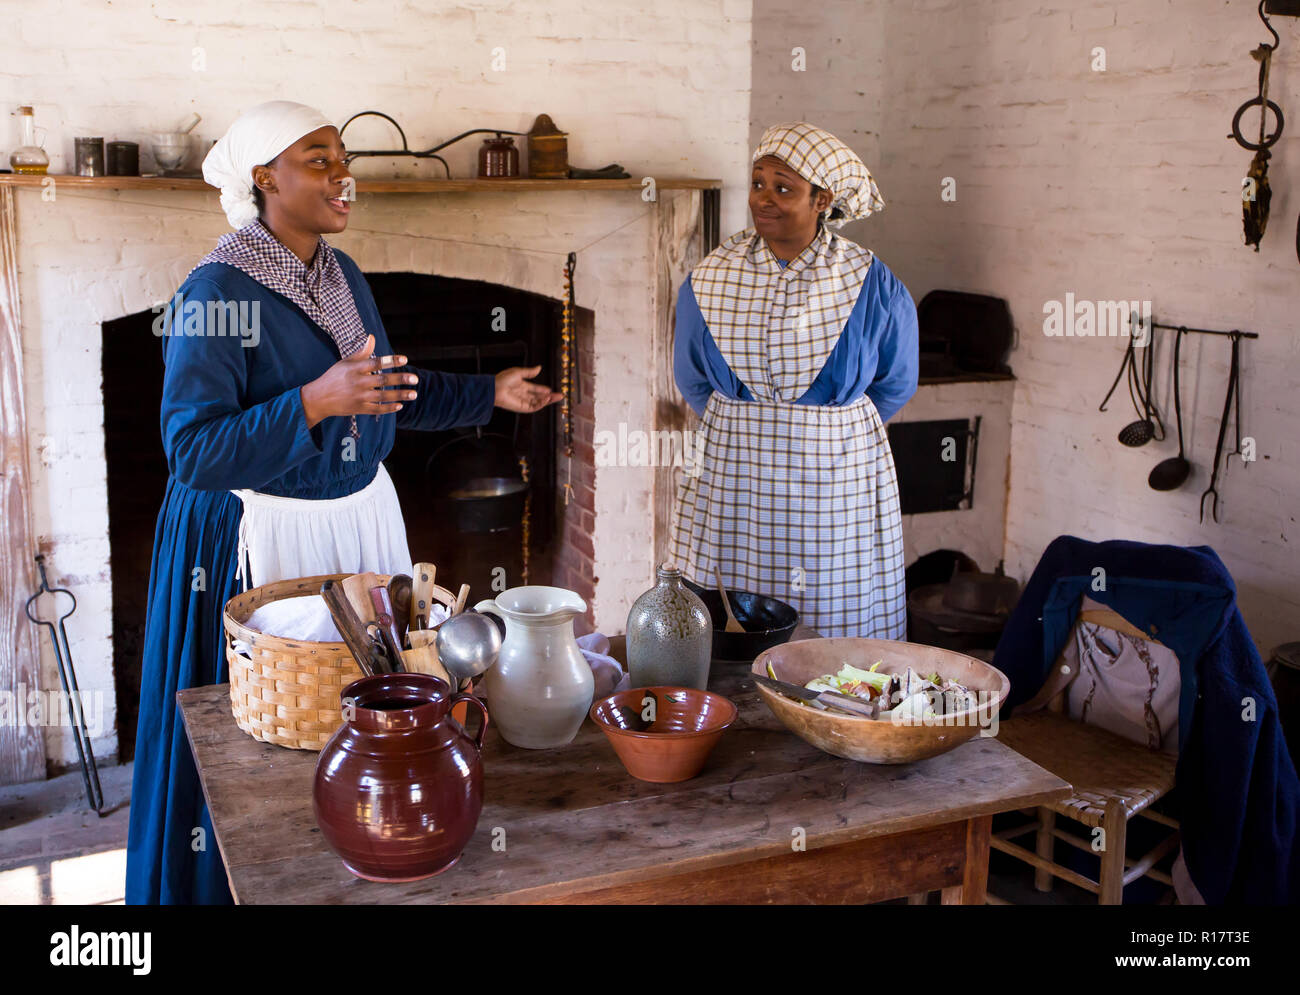 MCCONNELLS, SC (USA) - November 3, 2018:  Reenactors in costume describe the lives of enslaved people during a reenactment of the American Civil War. Stock Photo